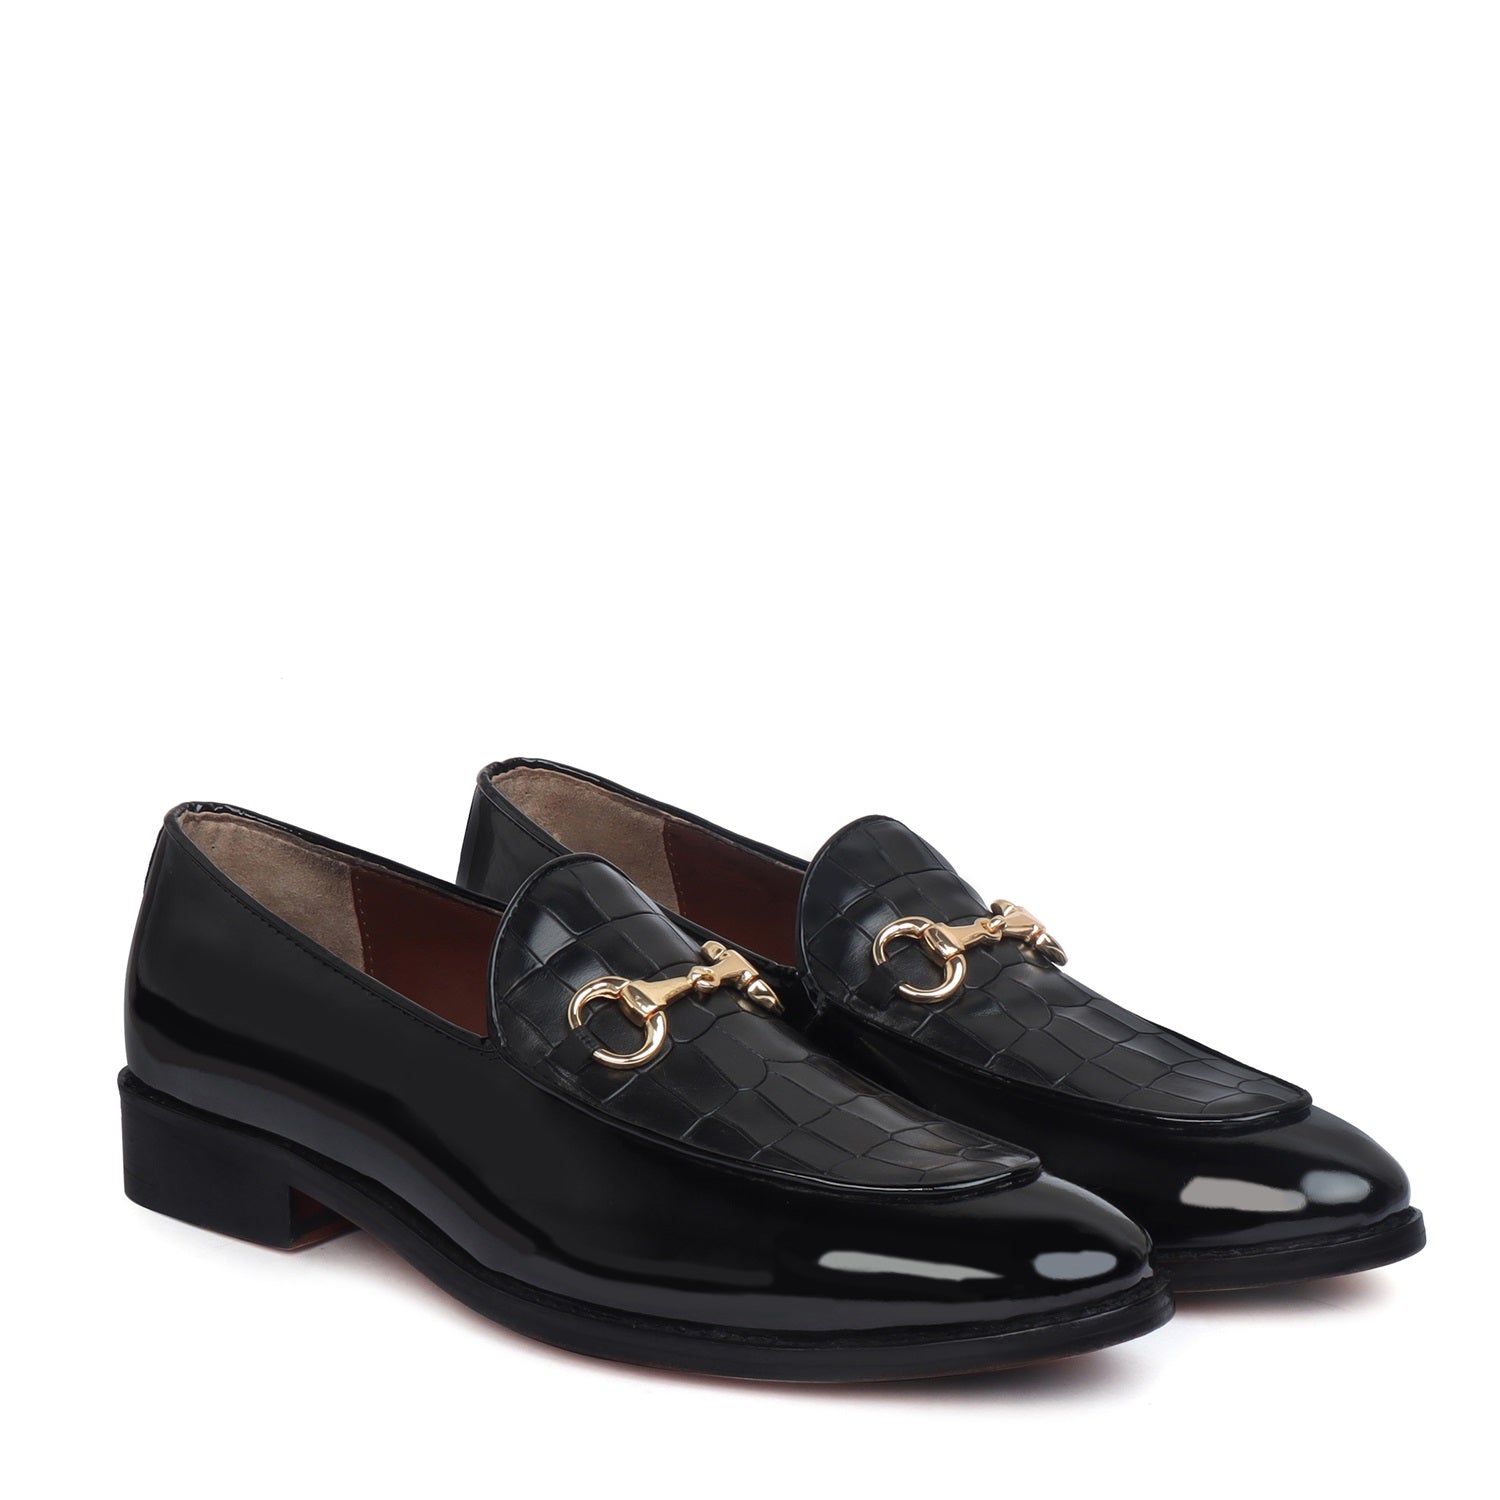 BLACK PATENT LEATHER LOAFER SHOE